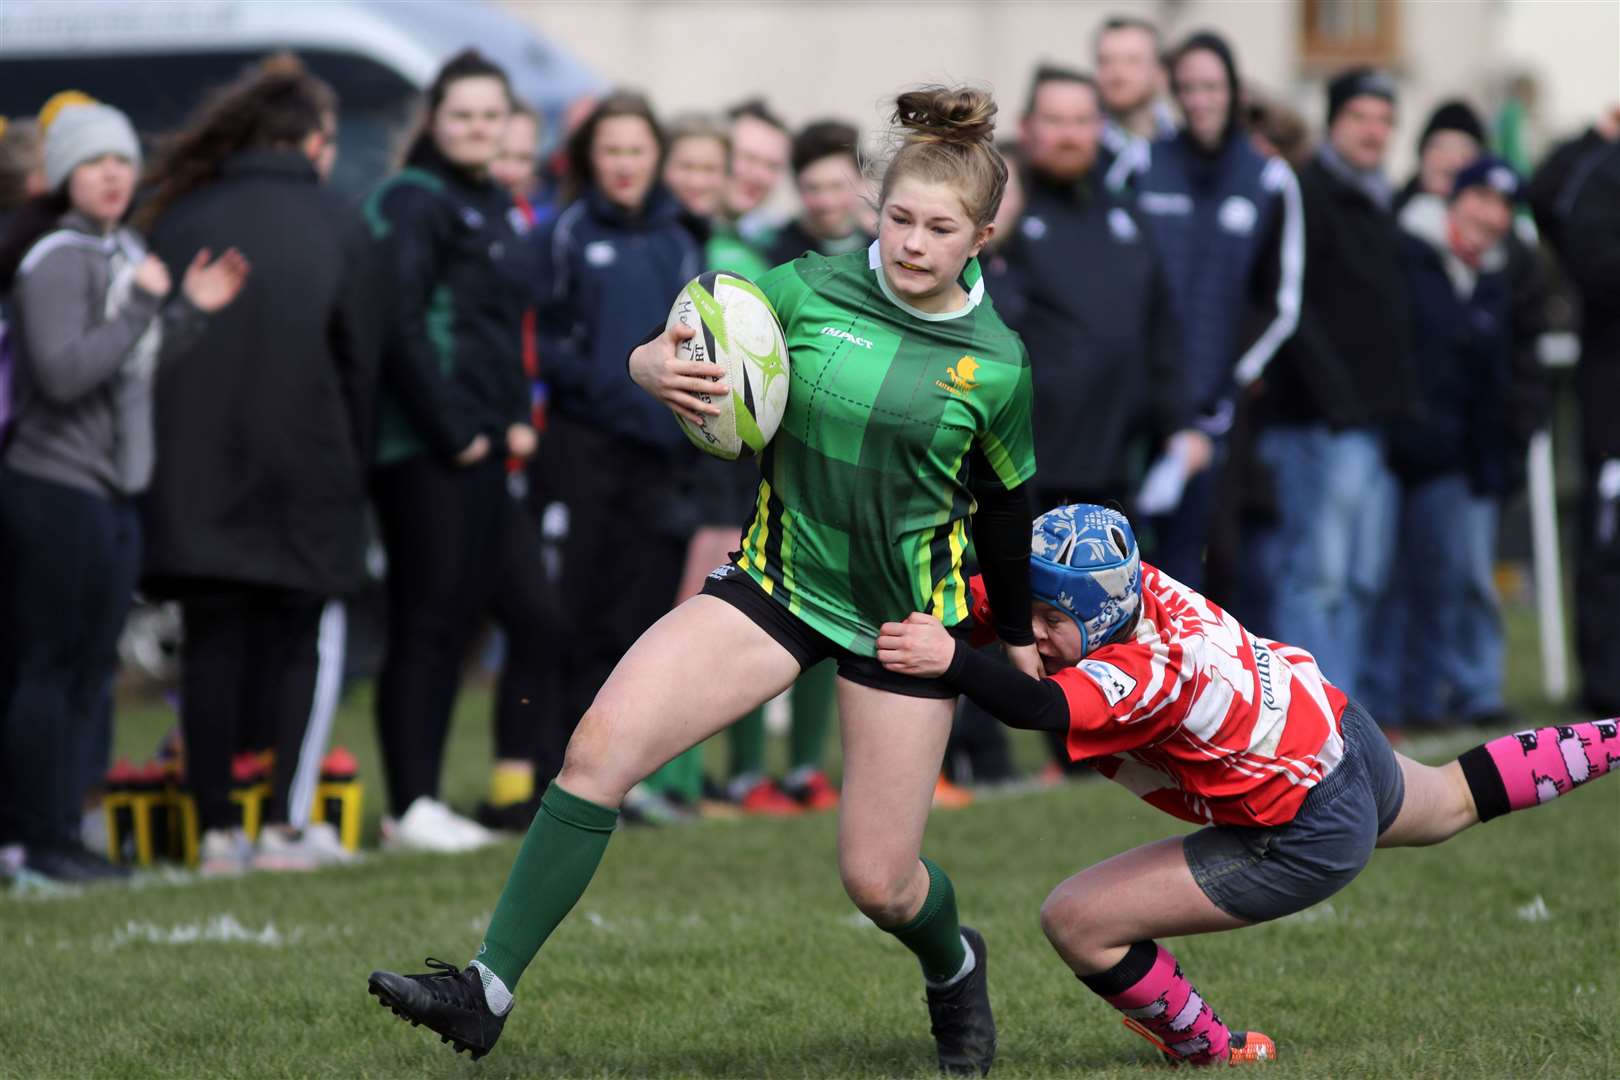 Hannah Dunnett of Caithness Girls U15 team shrugs off this challenge to score one of her five tries against Grampian at Millbank. Picture: James Gunn